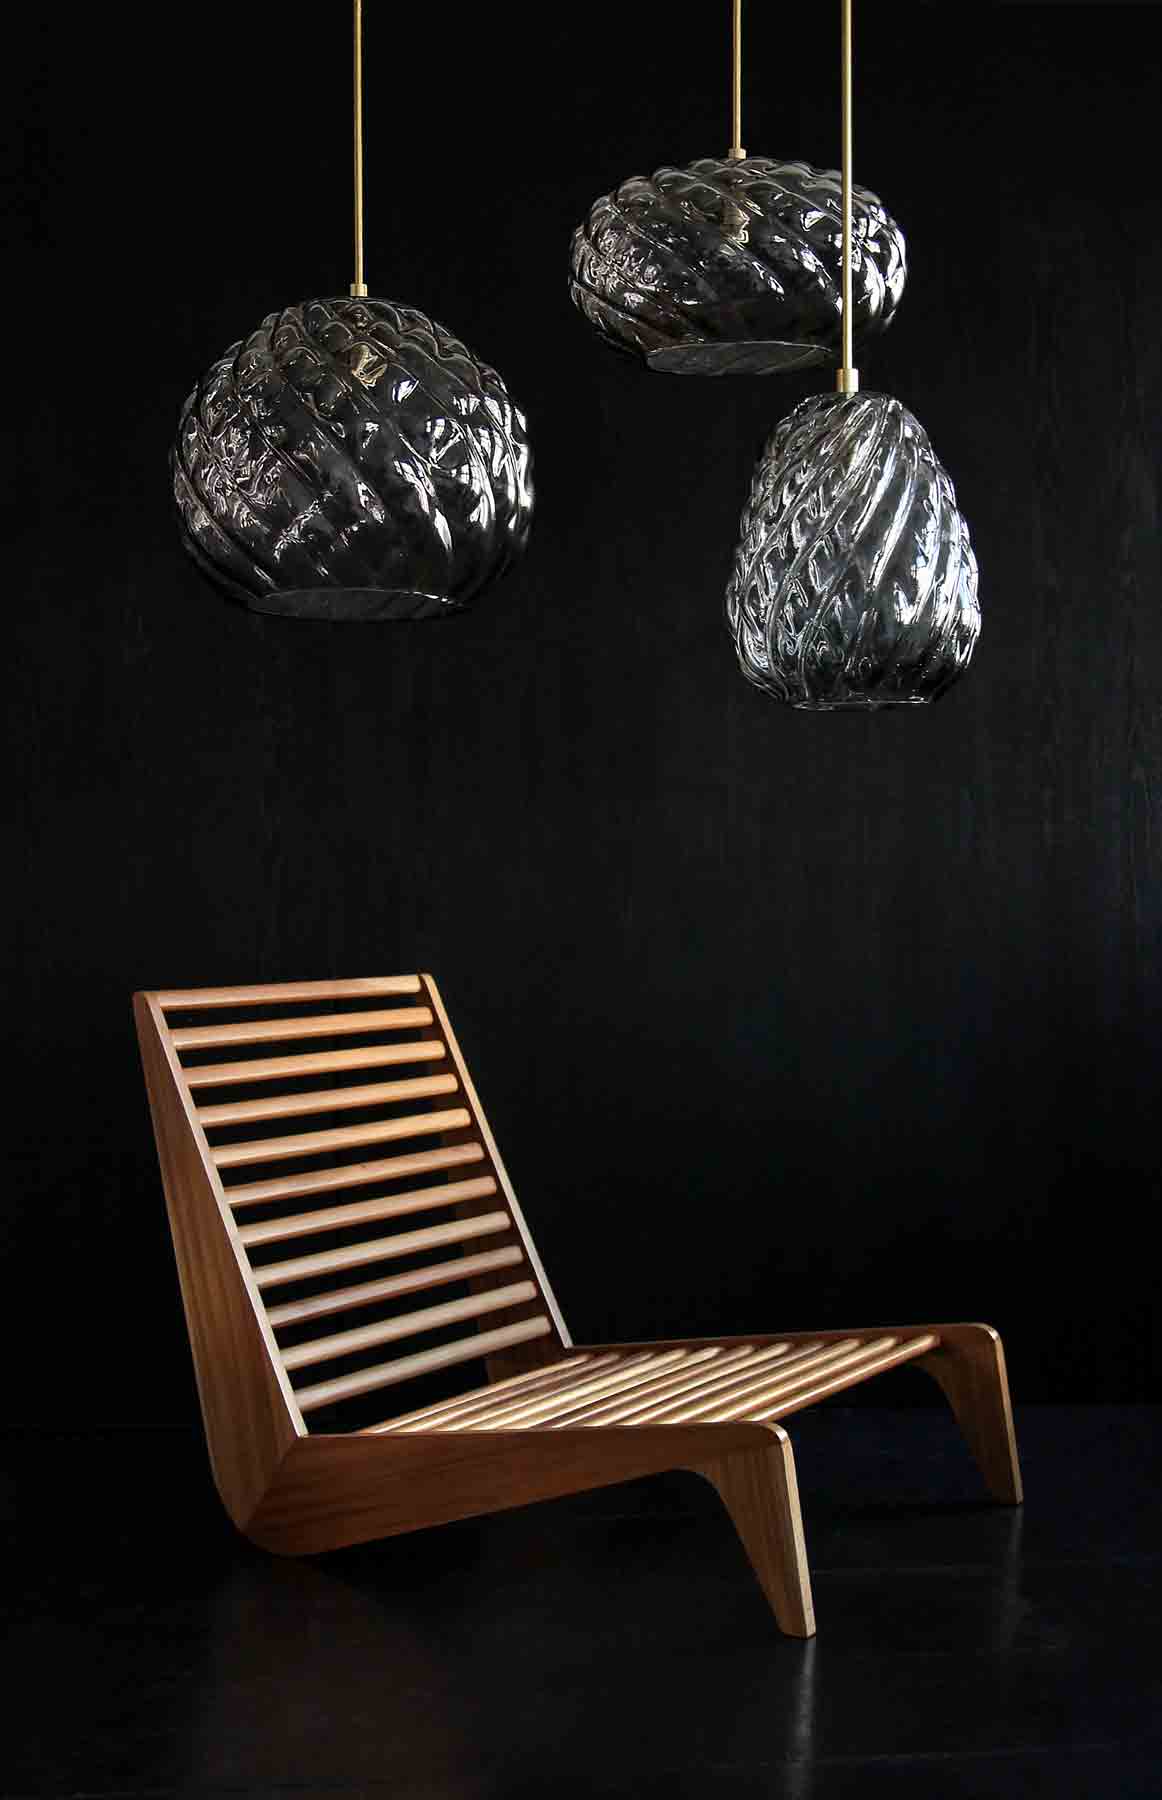 a modern cluster of handblown glass pendant lights in smoke glass with a luteca chair